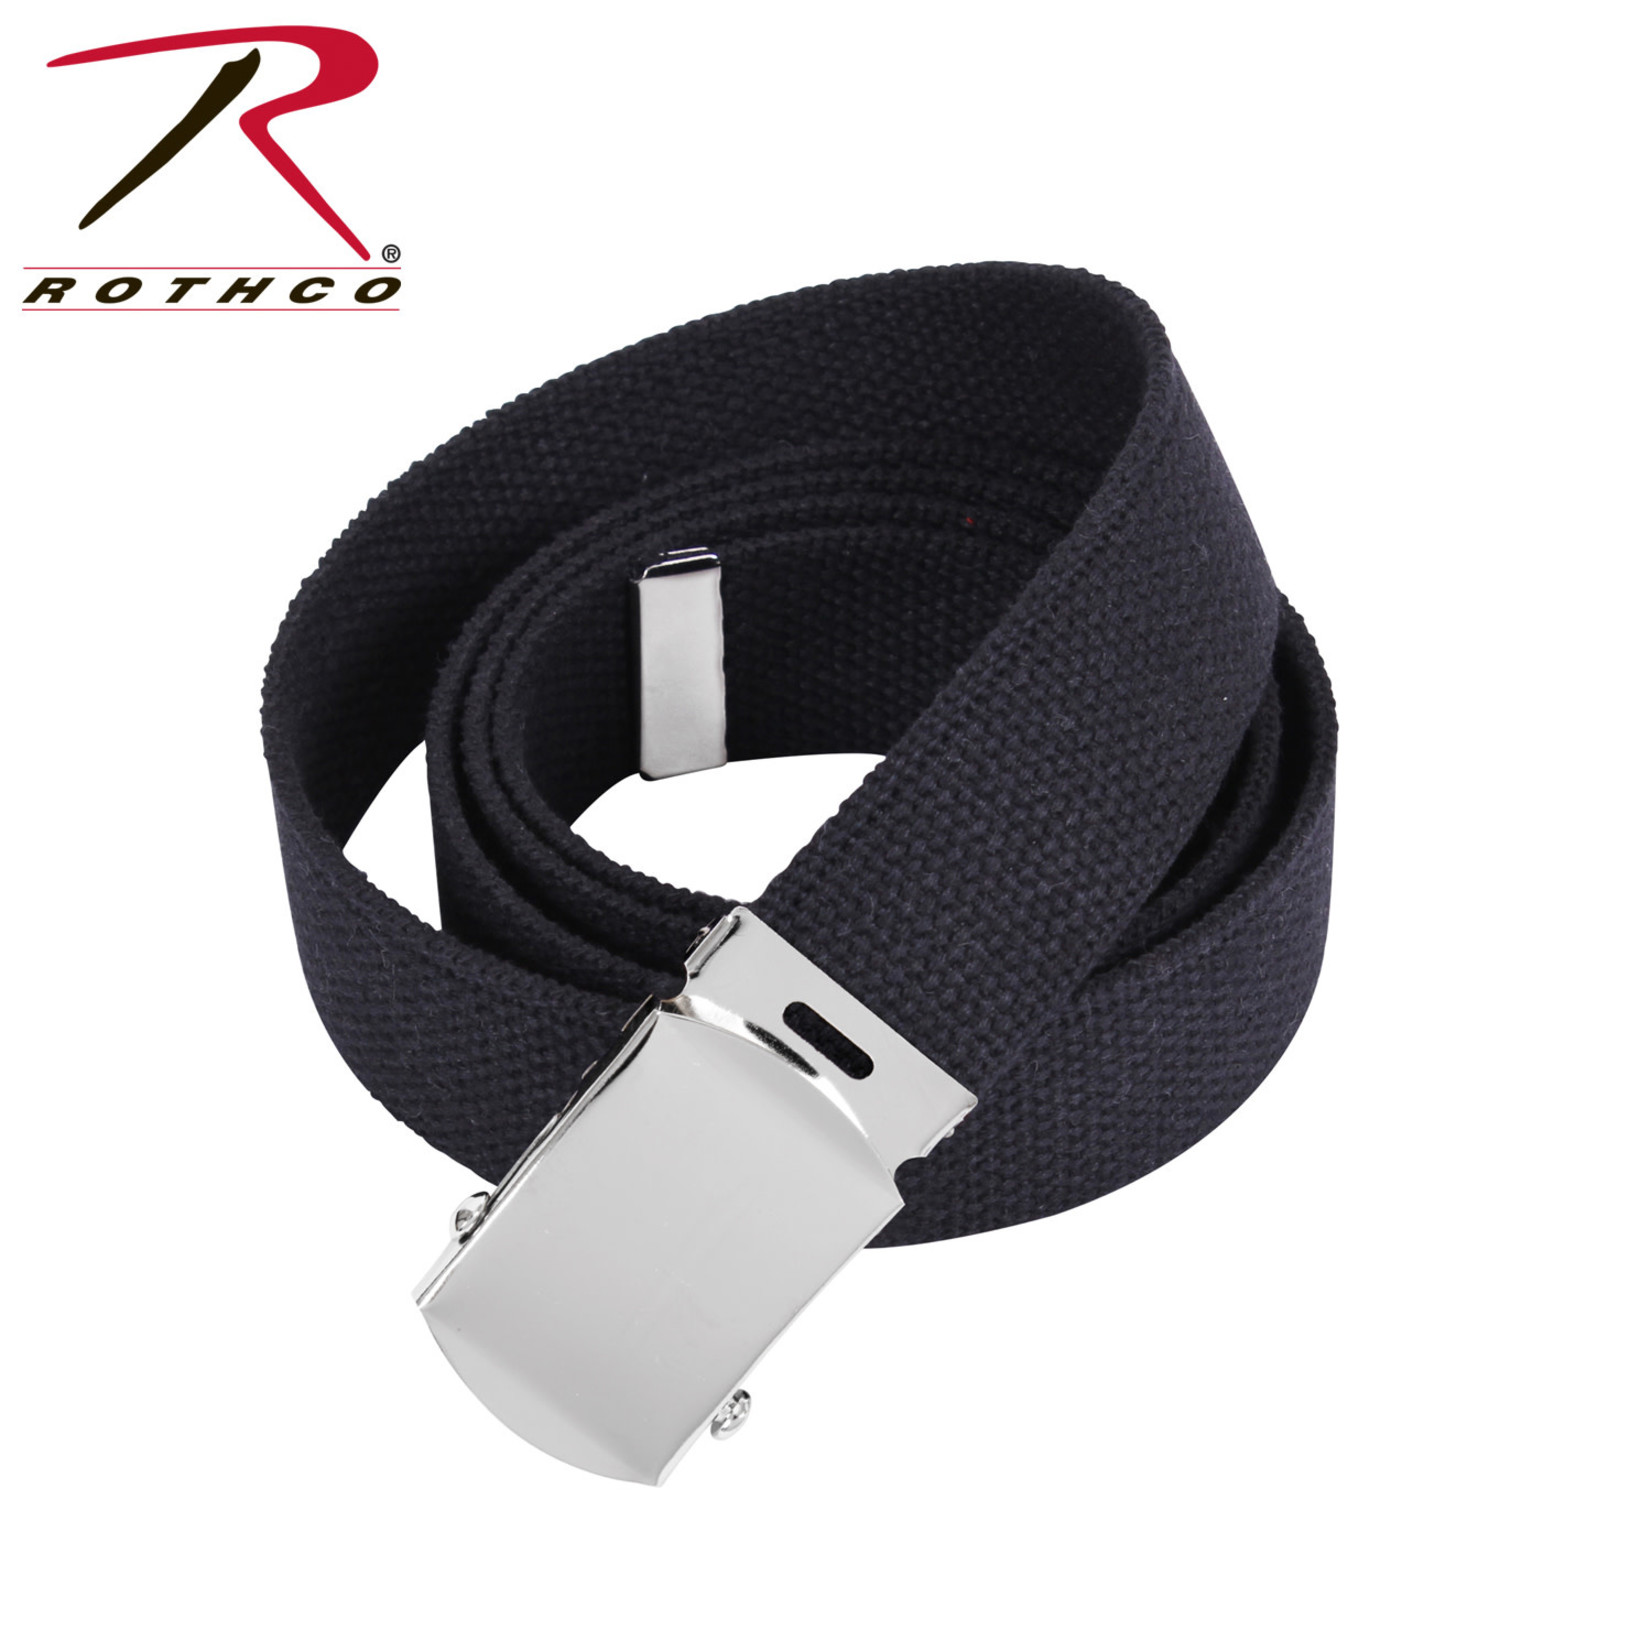 Rothco Rothco Solid Color Web Belt w/ Silver-Tone Buckle - 54"